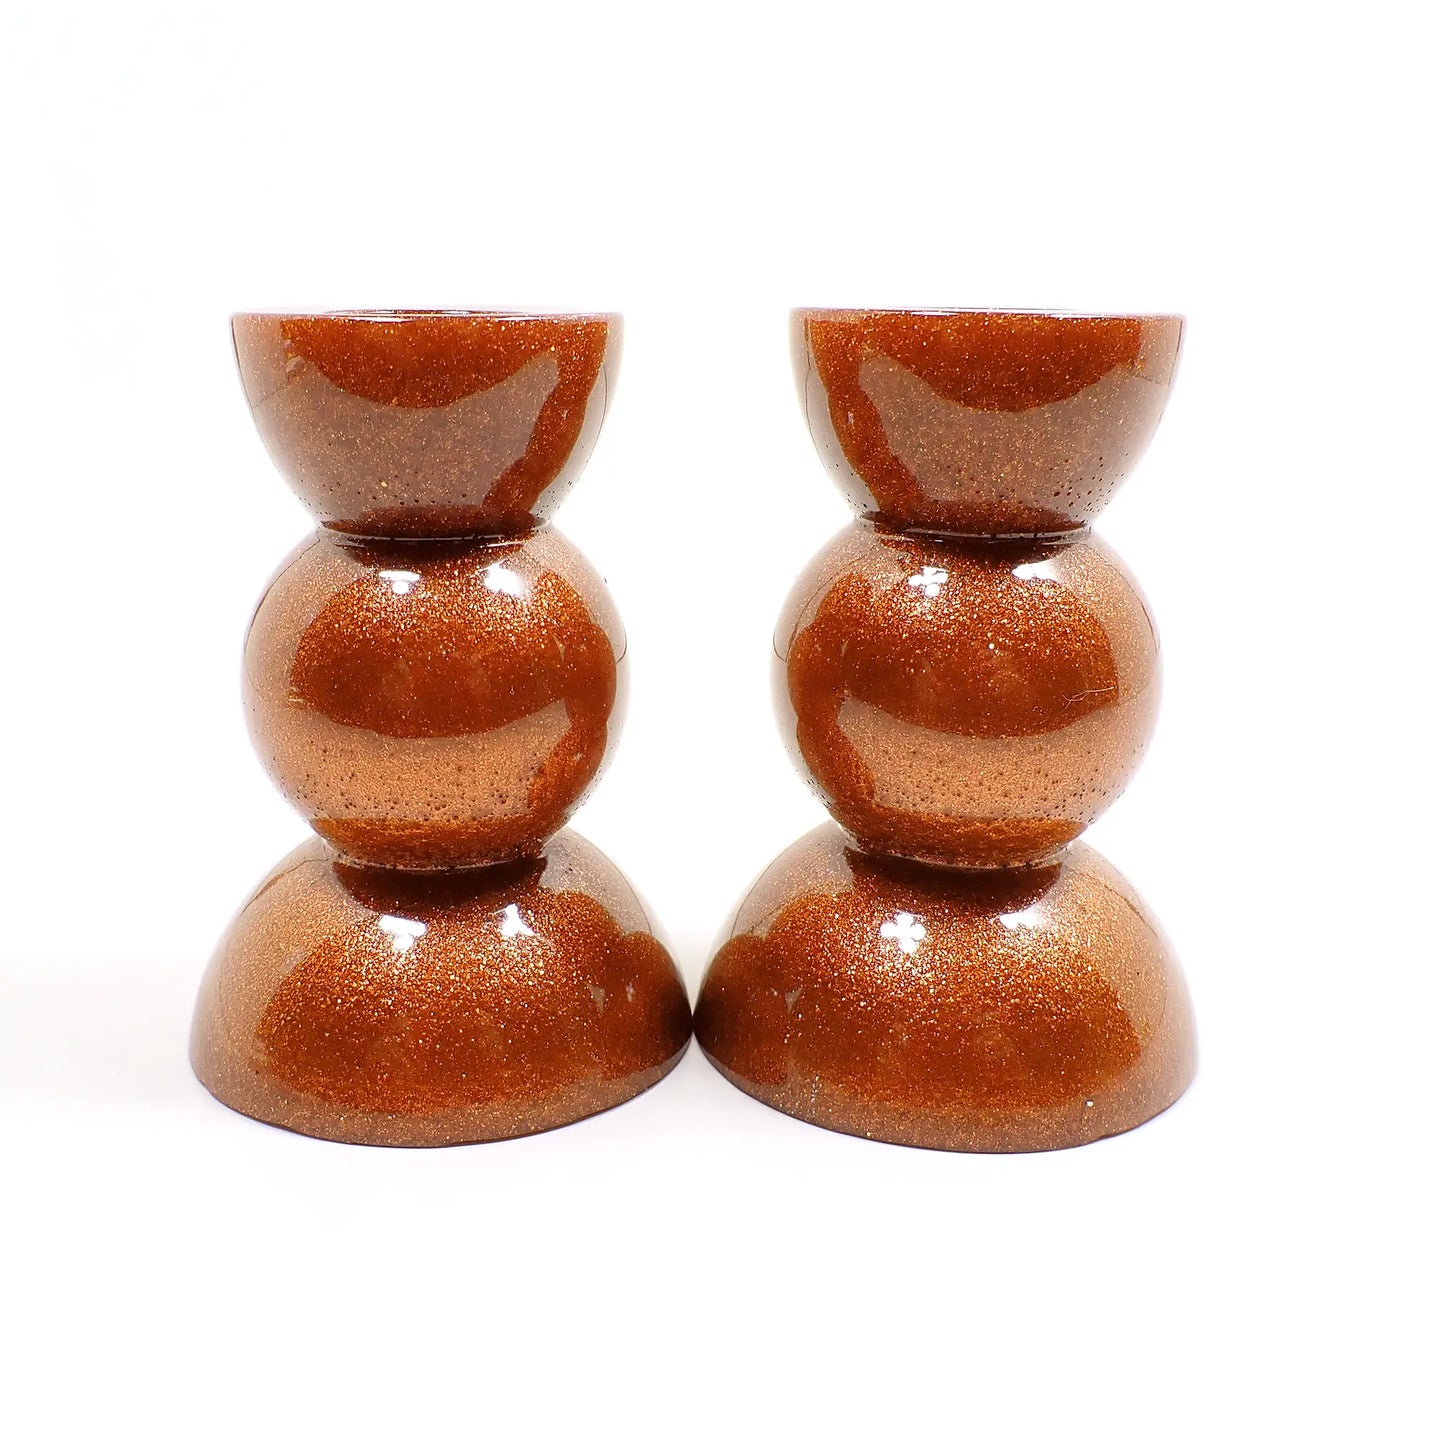 Set of Two Sparkly Copper Color Resin Handmade Rounded Geometric Candlestick Holders